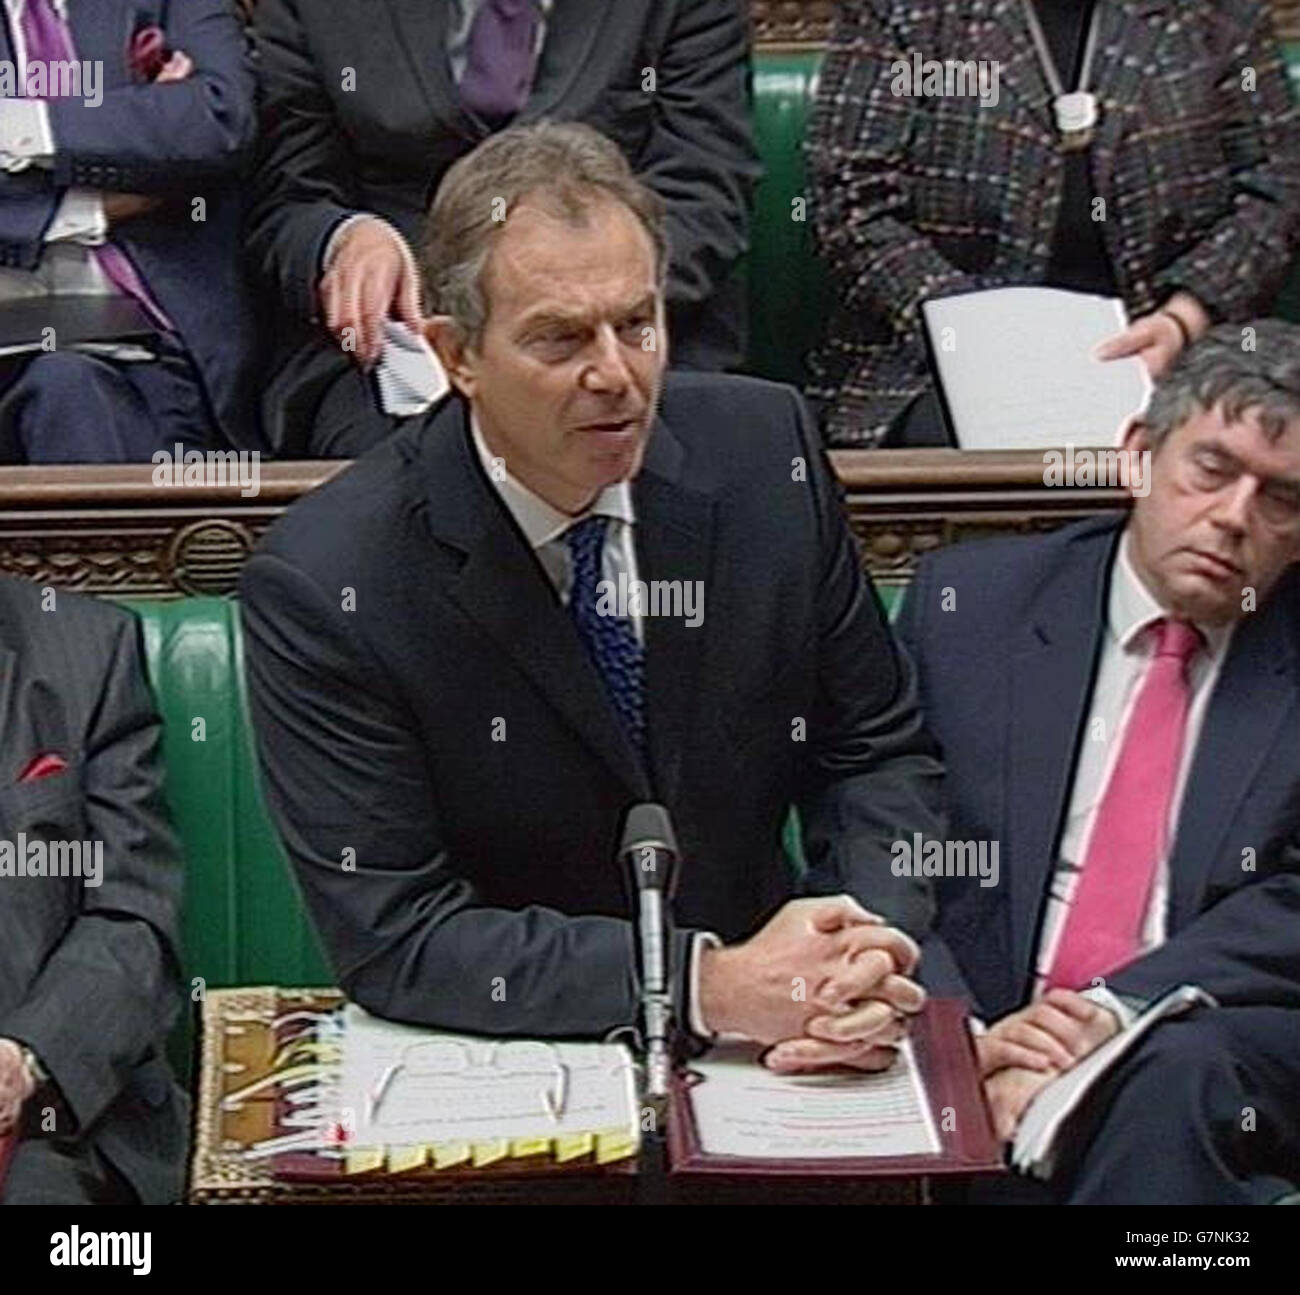 Prime Minster's Questions - House of Commons. British Prime Minister Tony Blair. Stock Photo